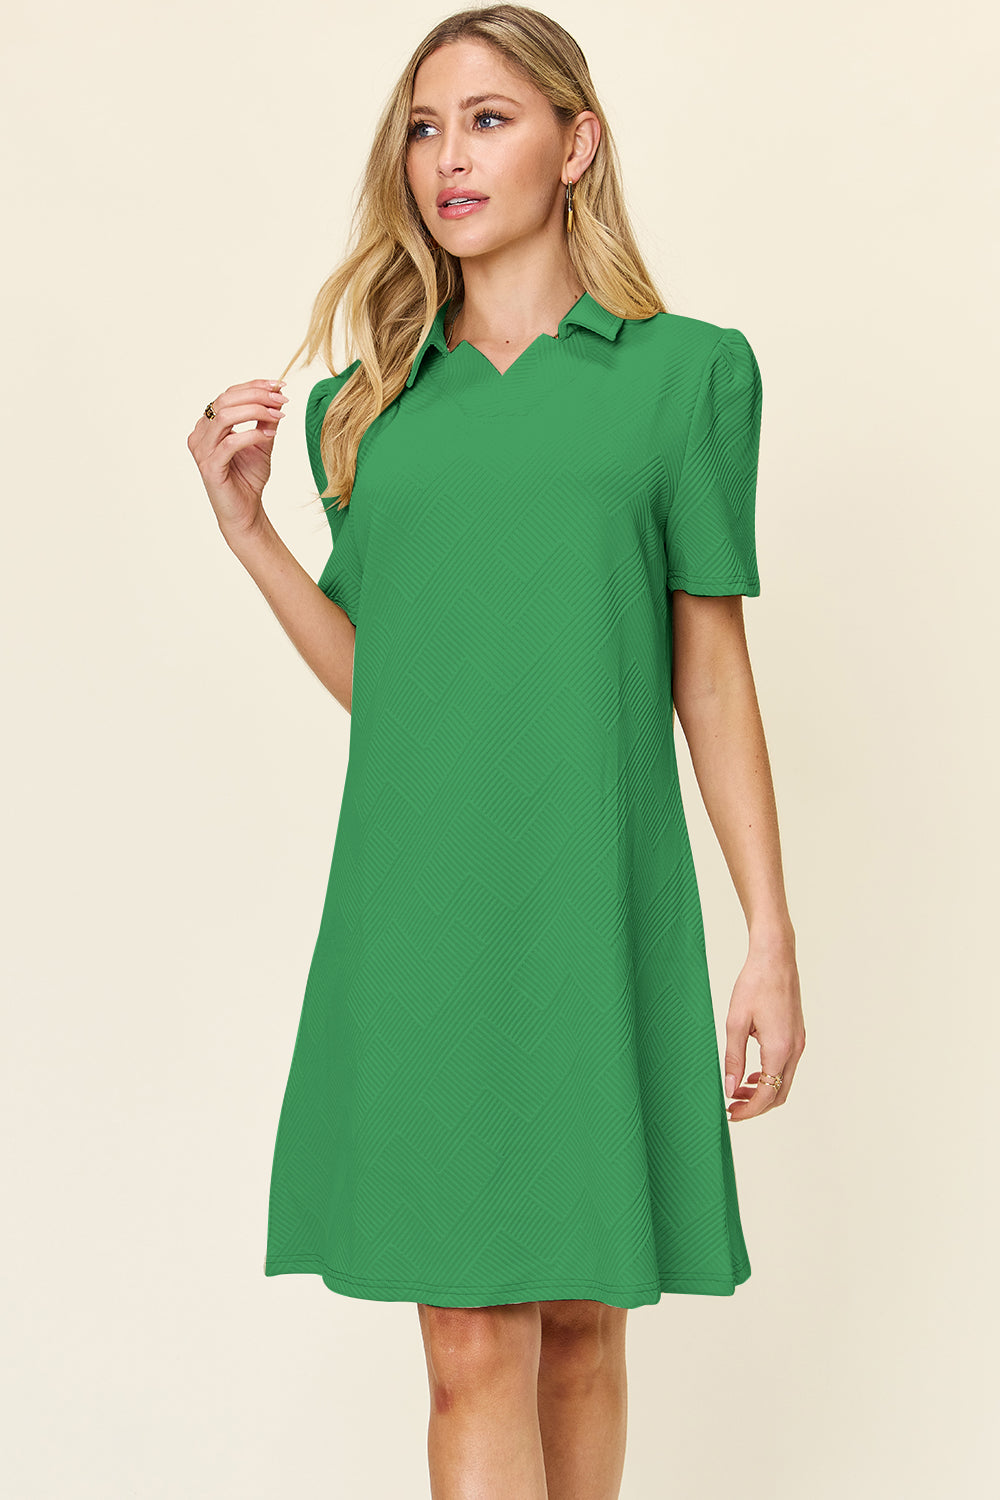 Double Take Full Size Texture Collared Neck Short Sleeve Dress - Vogue Fusion